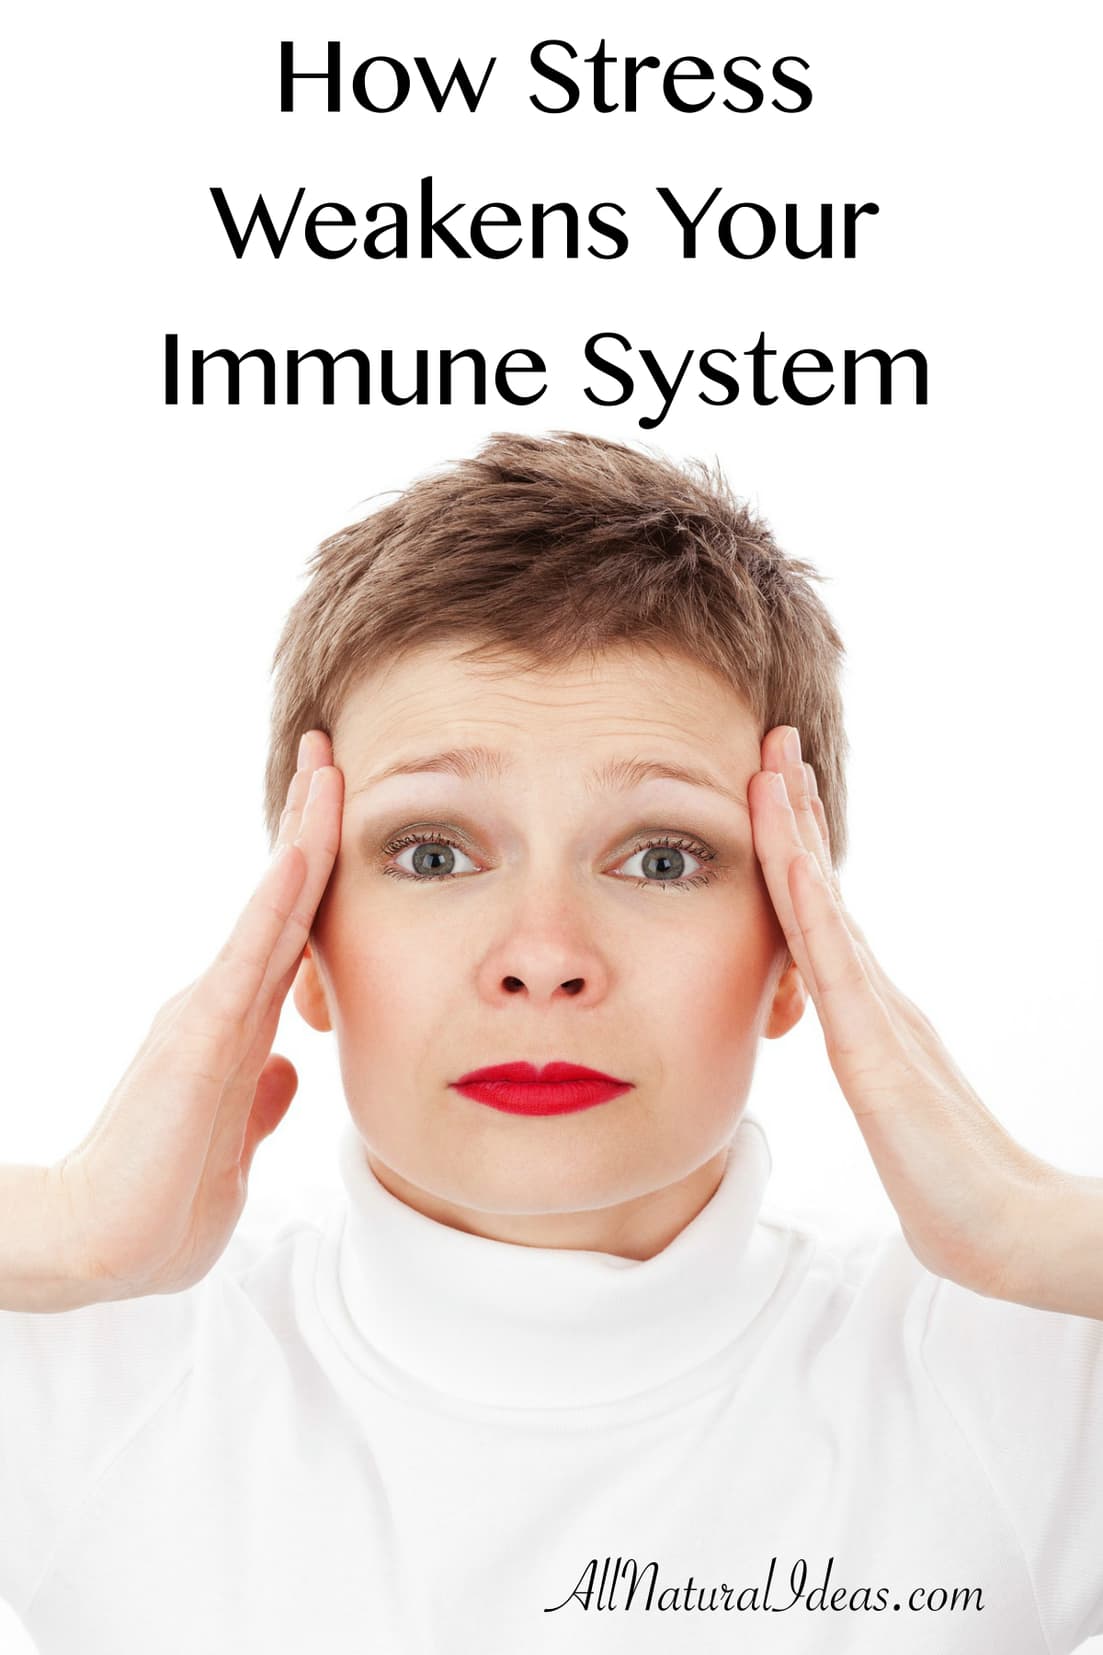 How stress weakens your immune system